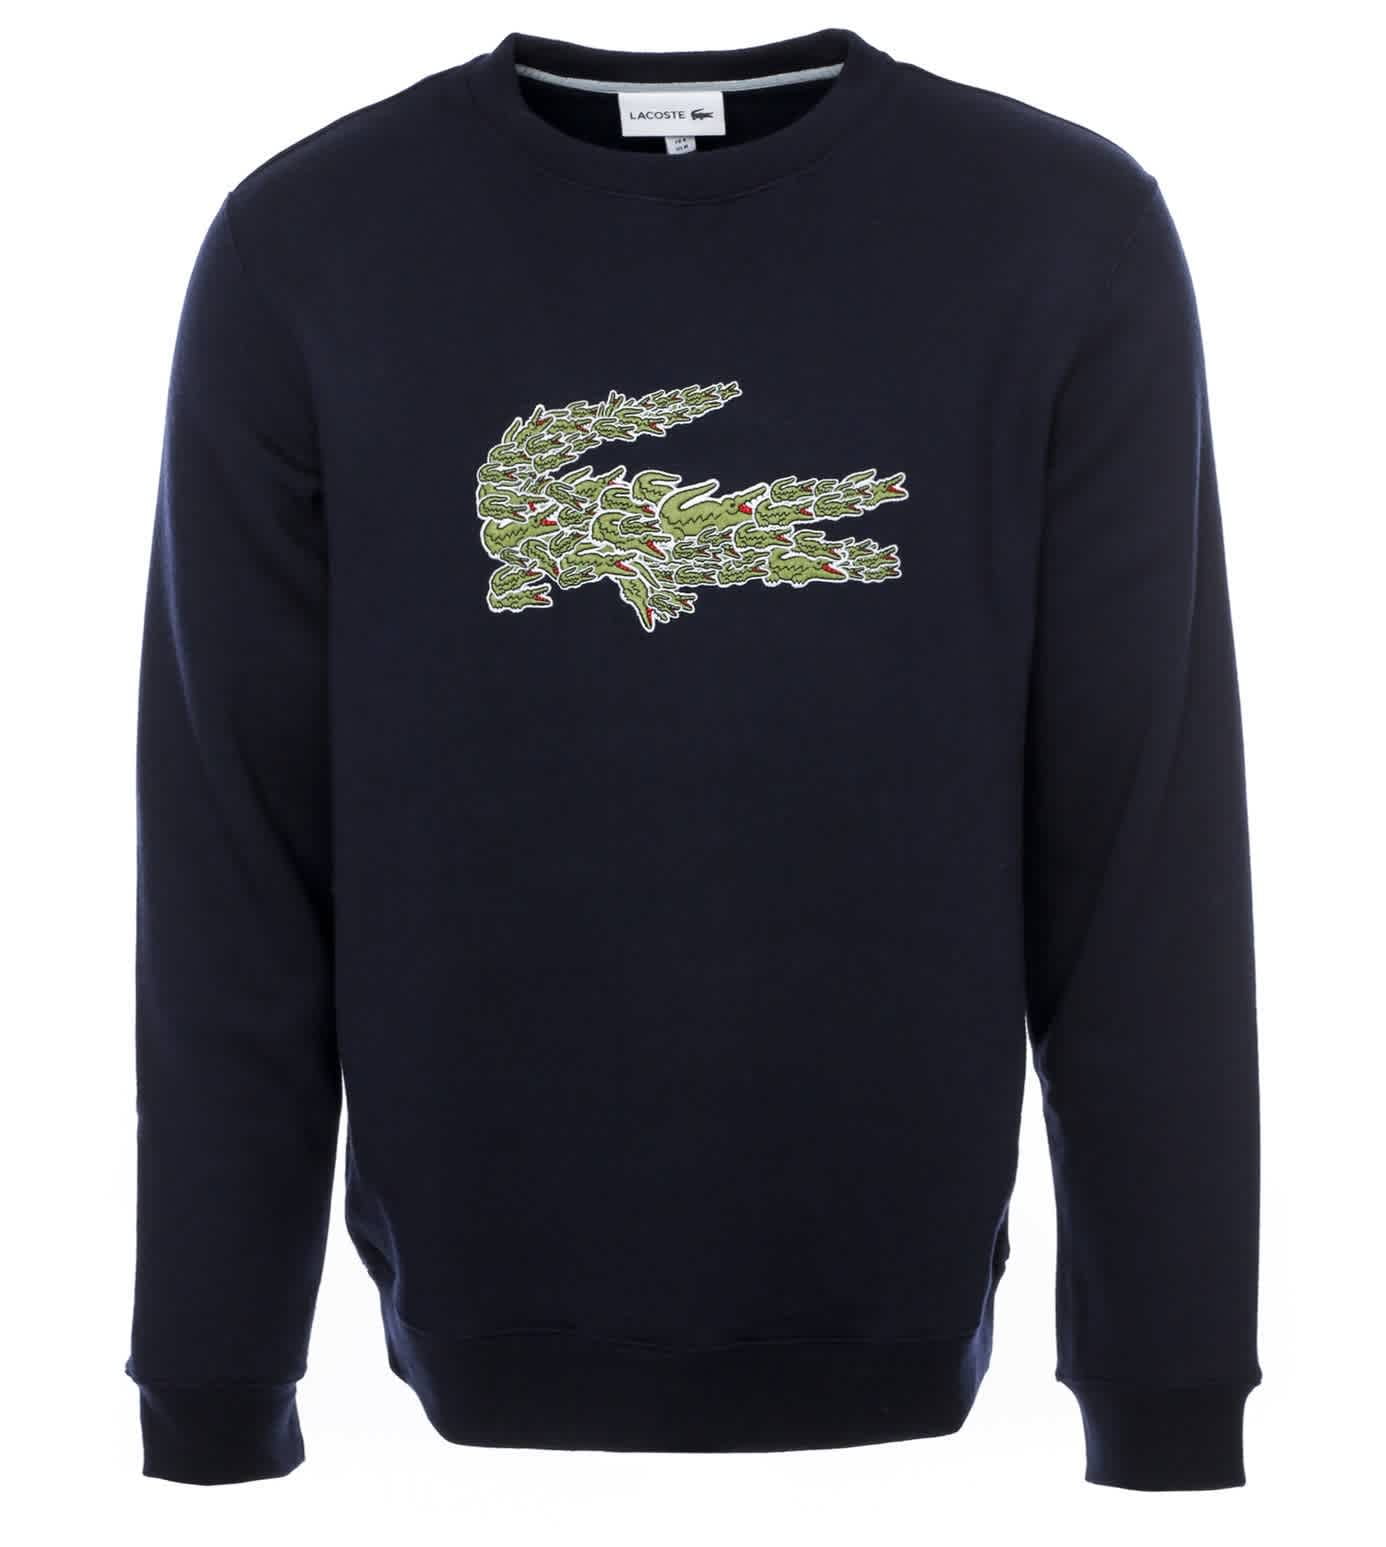 lacoste sweater with big alligator